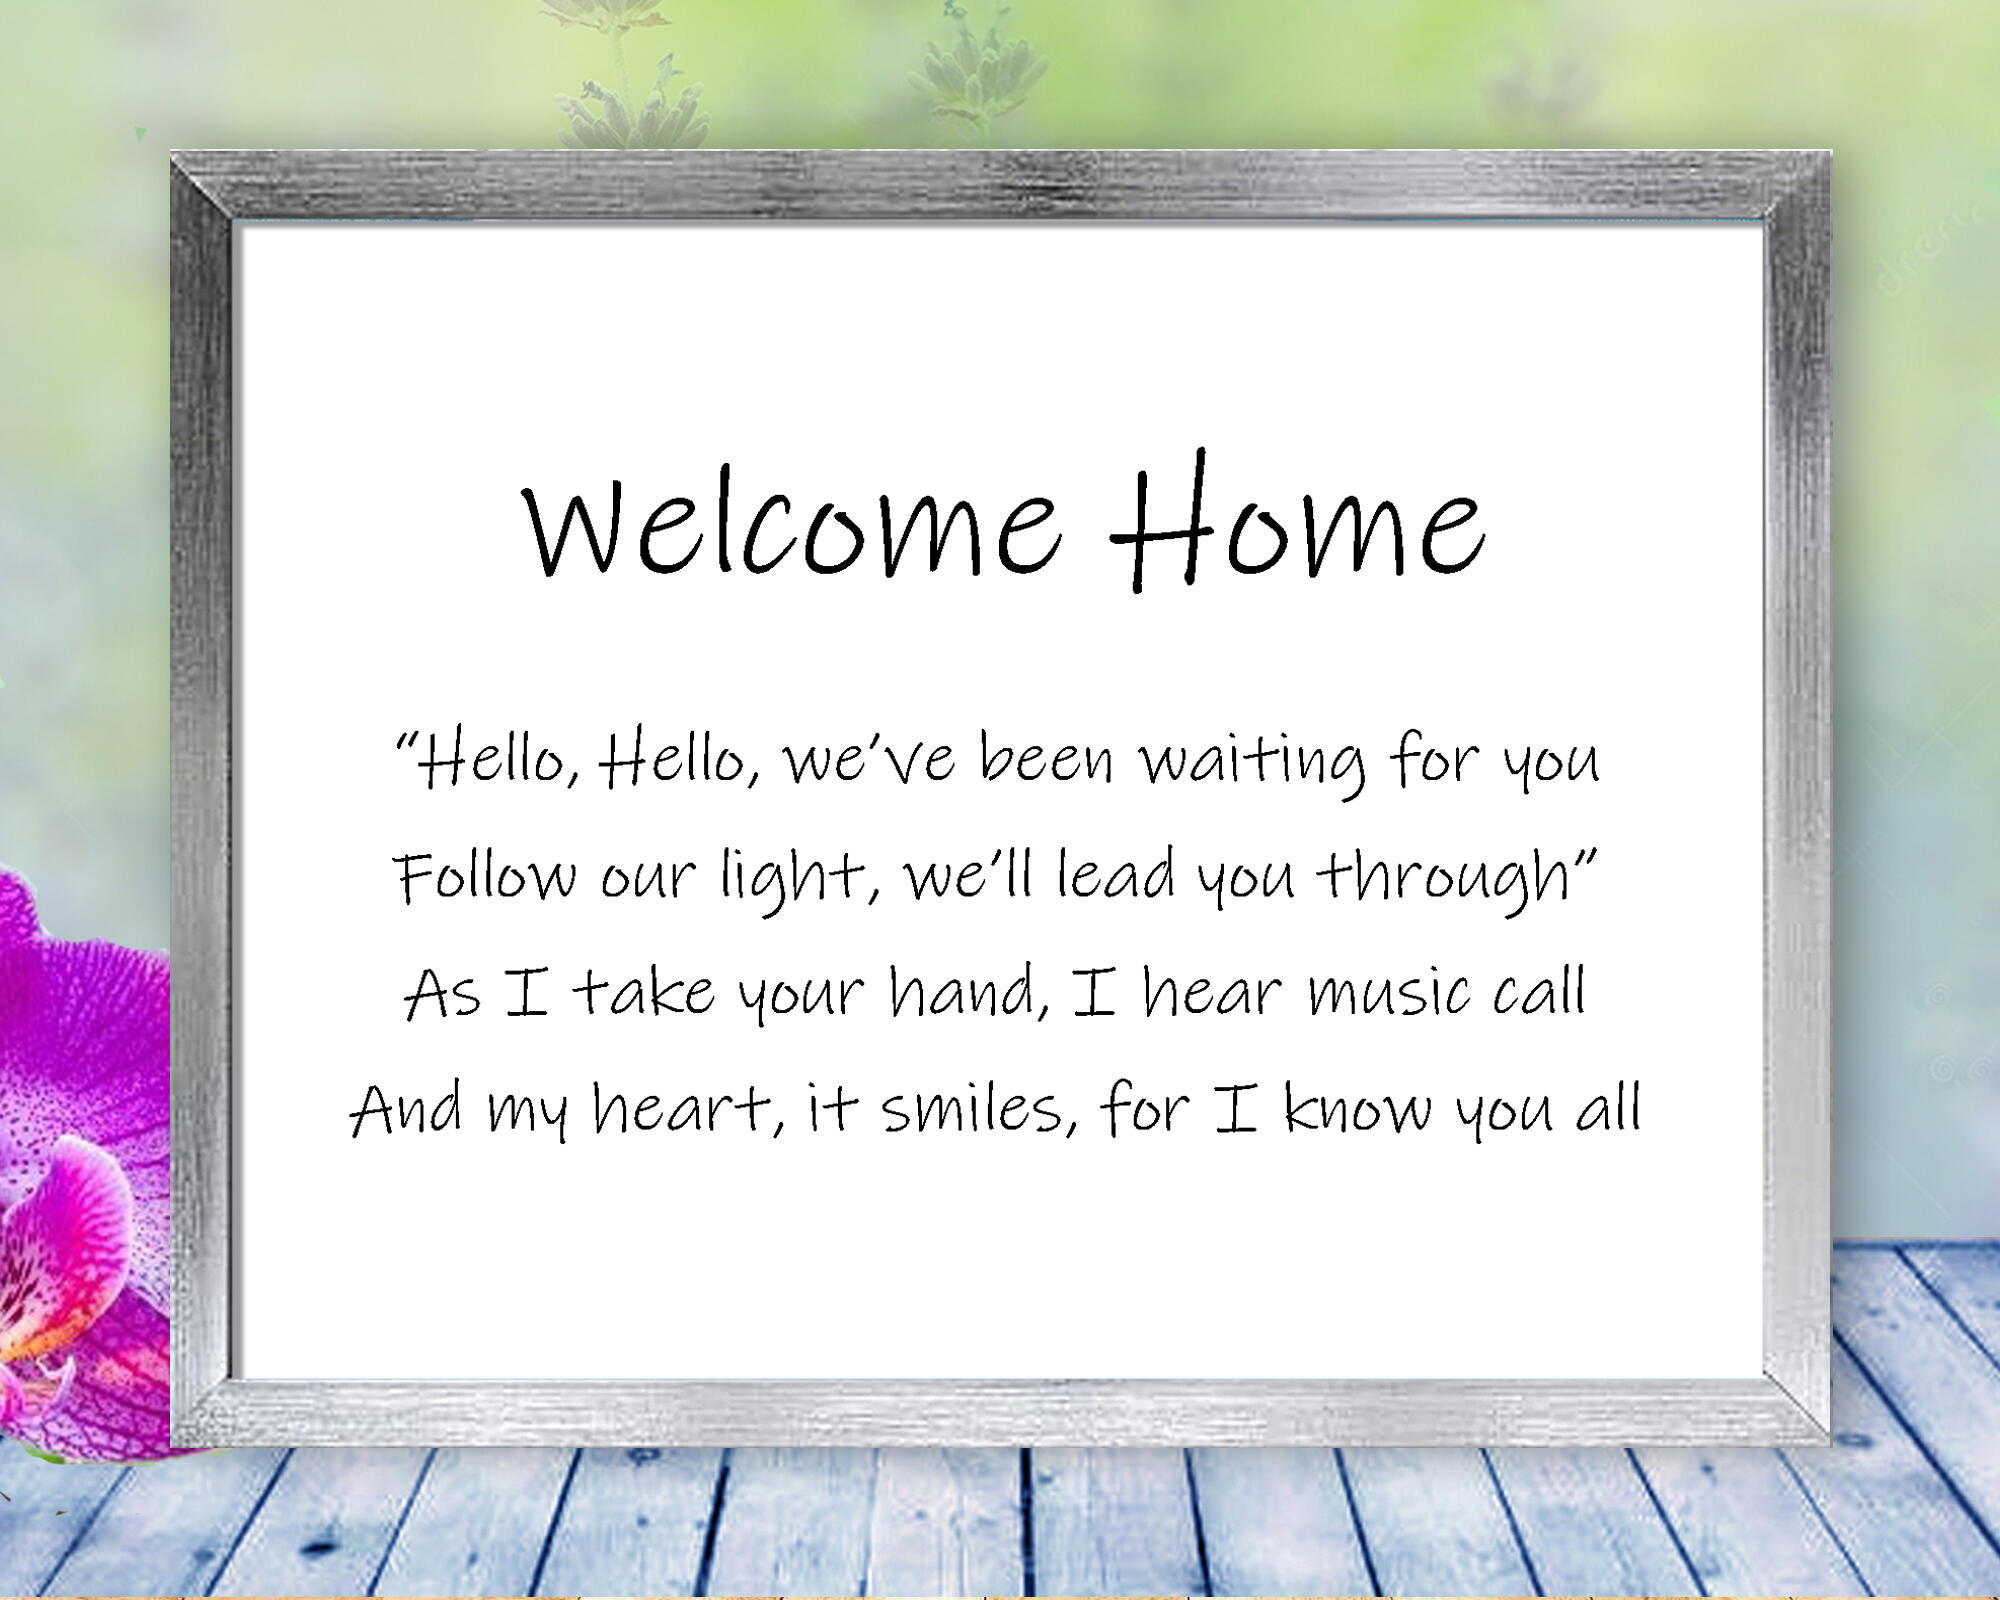 Poem for Welcome Home - Angels come to take you home, or so it seems, in this haunting, beautiful, nature print with poem - Welcome Home by The Poetry of Nature